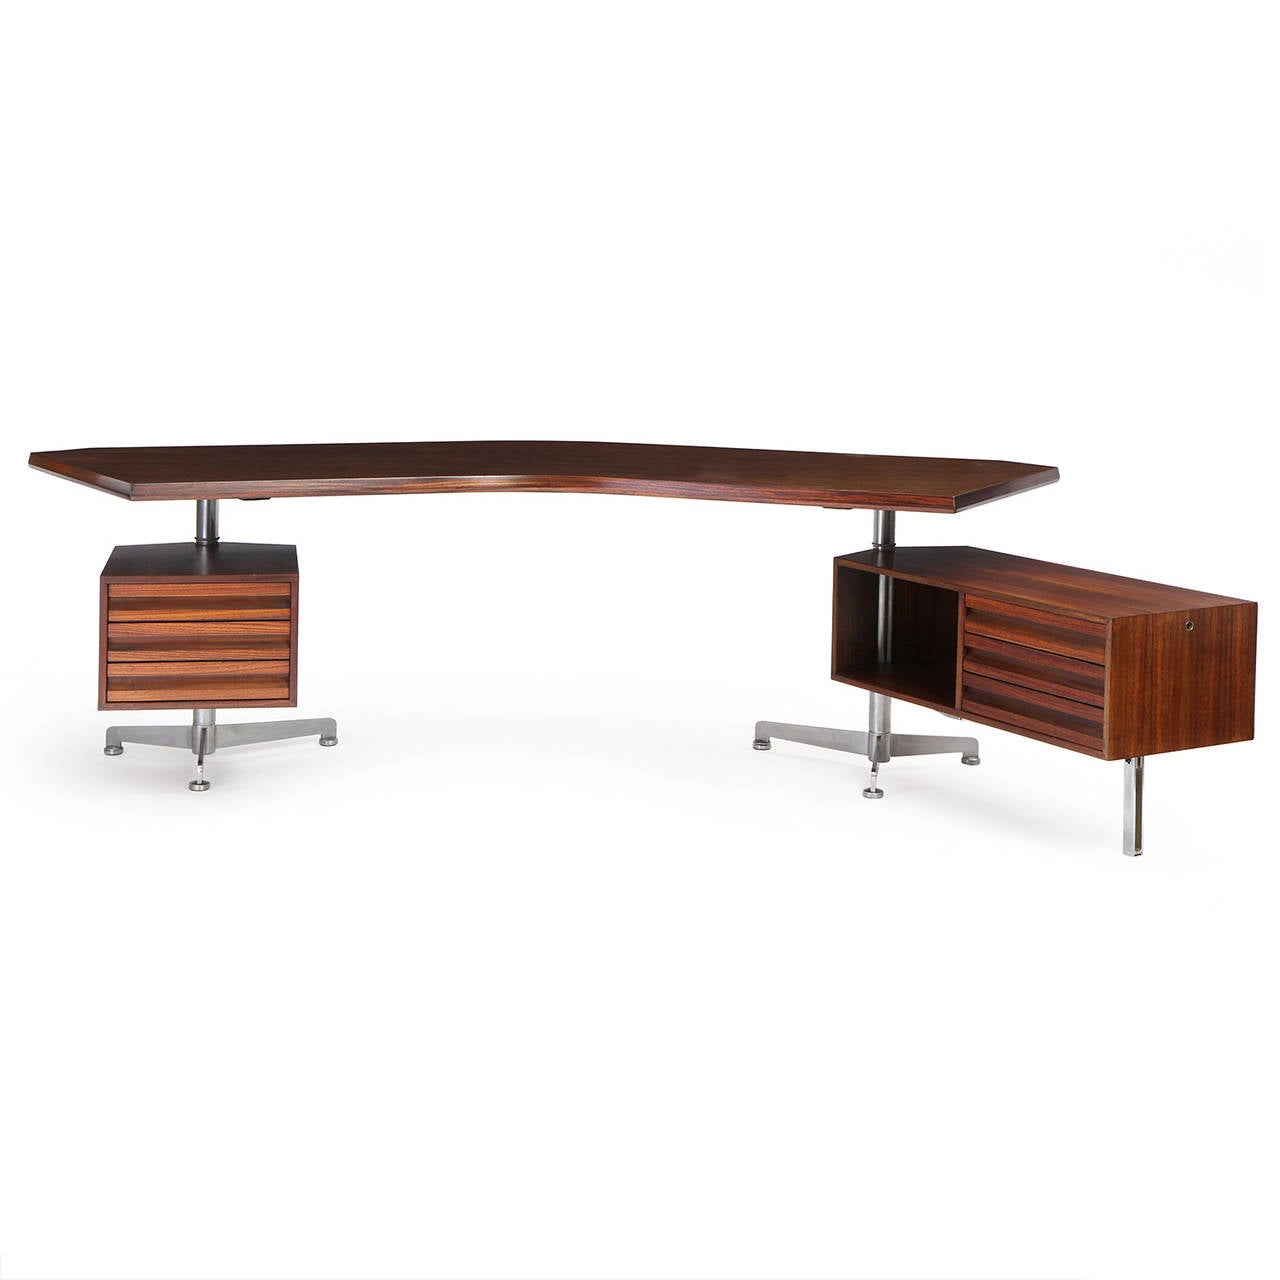 A dynamic and early version of a dramatic modernist desk in steel and walnut having a chevron shaped top with pivoting and floating attached cases with three drawers each.